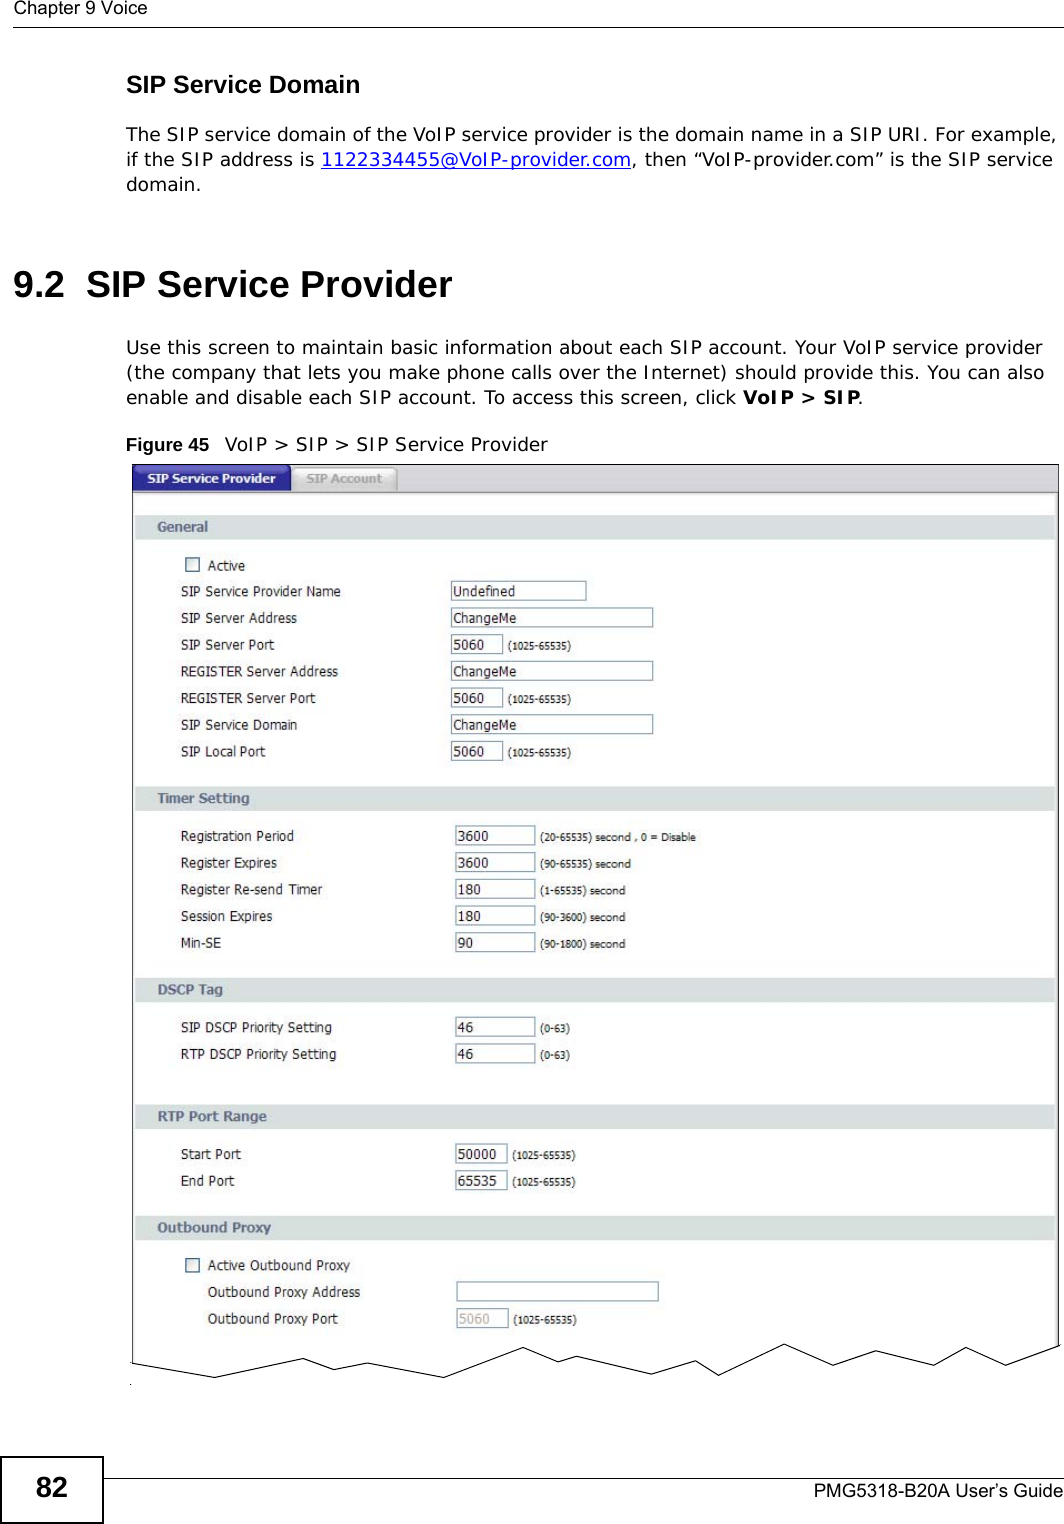 Chapter 9 VoicePMG5318-B20A User’s Guide82SIP Service DomainThe SIP service domain of the VoIP service provider is the domain name in a SIP URI. For example, if the SIP address is 1122334455@VoIP-provider.com, then “VoIP-provider.com” is the SIP service domain.9.2  SIP Service ProviderUse this screen to maintain basic information about each SIP account. Your VoIP service provider (the company that lets you make phone calls over the Internet) should provide this. You can also enable and disable each SIP account. To access this screen, click VoIP &gt; SIP.Figure 45   VoIP &gt; SIP &gt; SIP Service Provider    